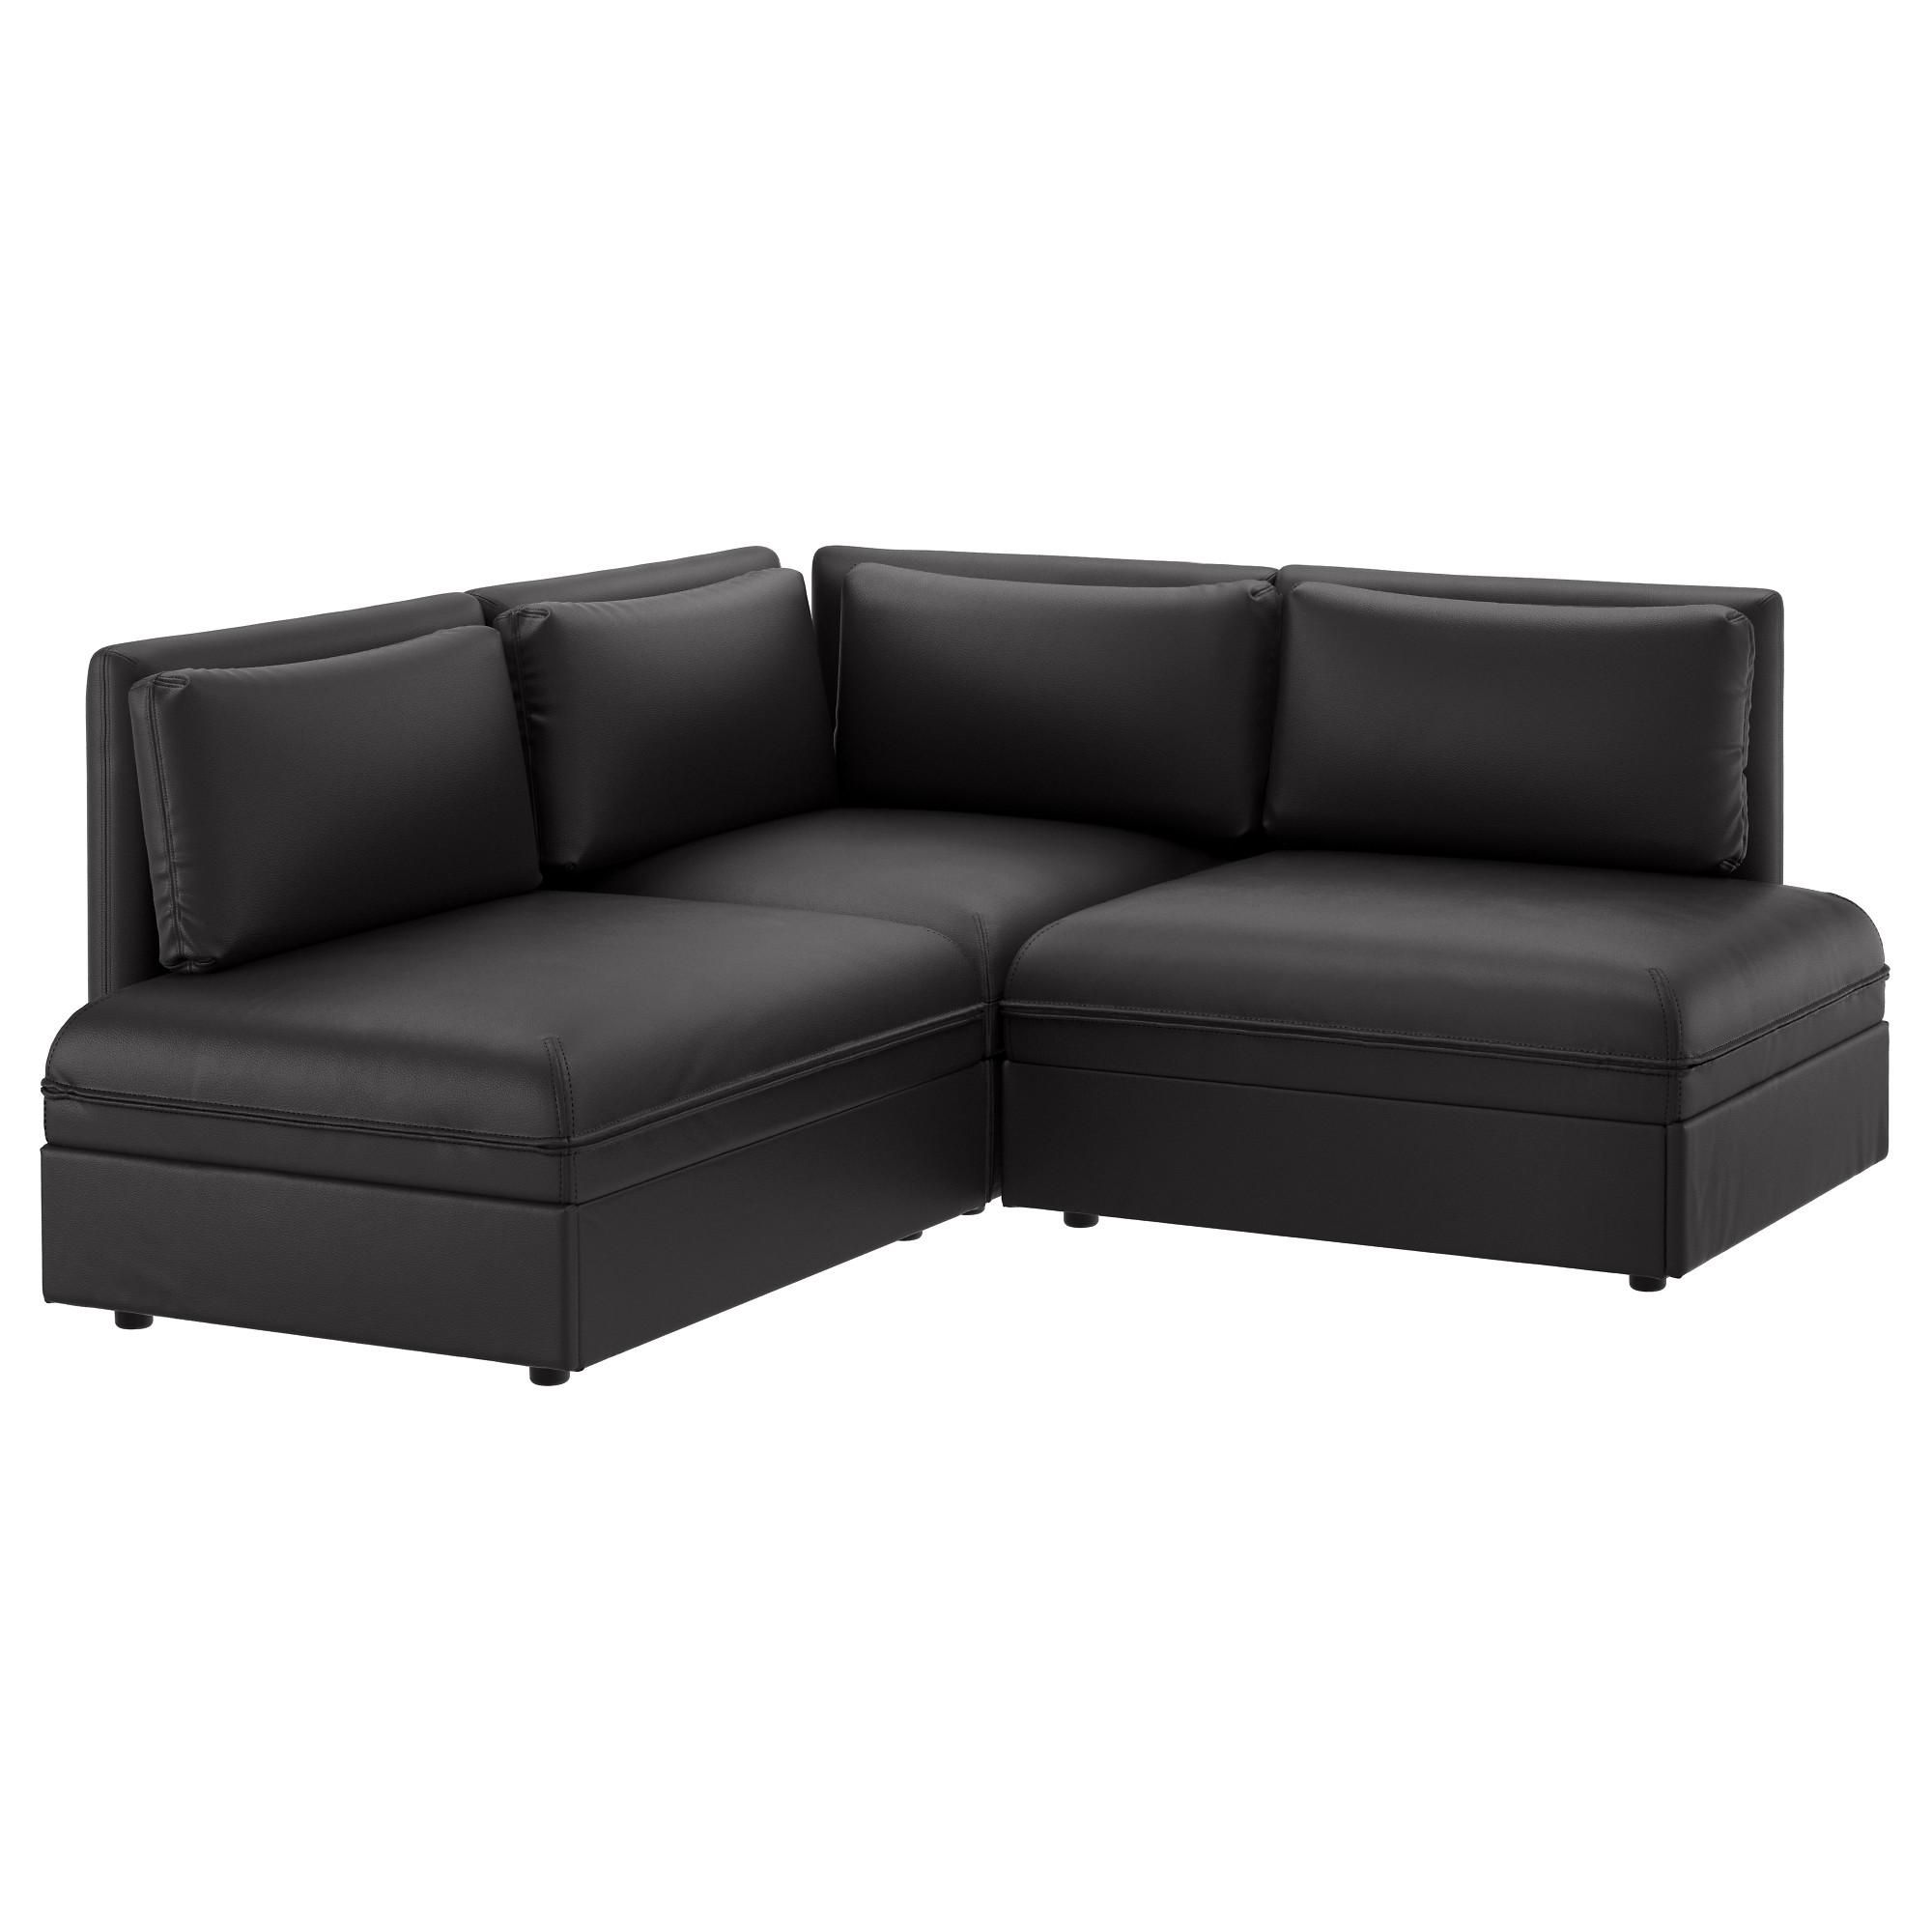 Sofas Center : New Standard Leather Sofa With Chaise Blu Dot Brown Within Black Leather Chaise Sofas (View 18 of 20)